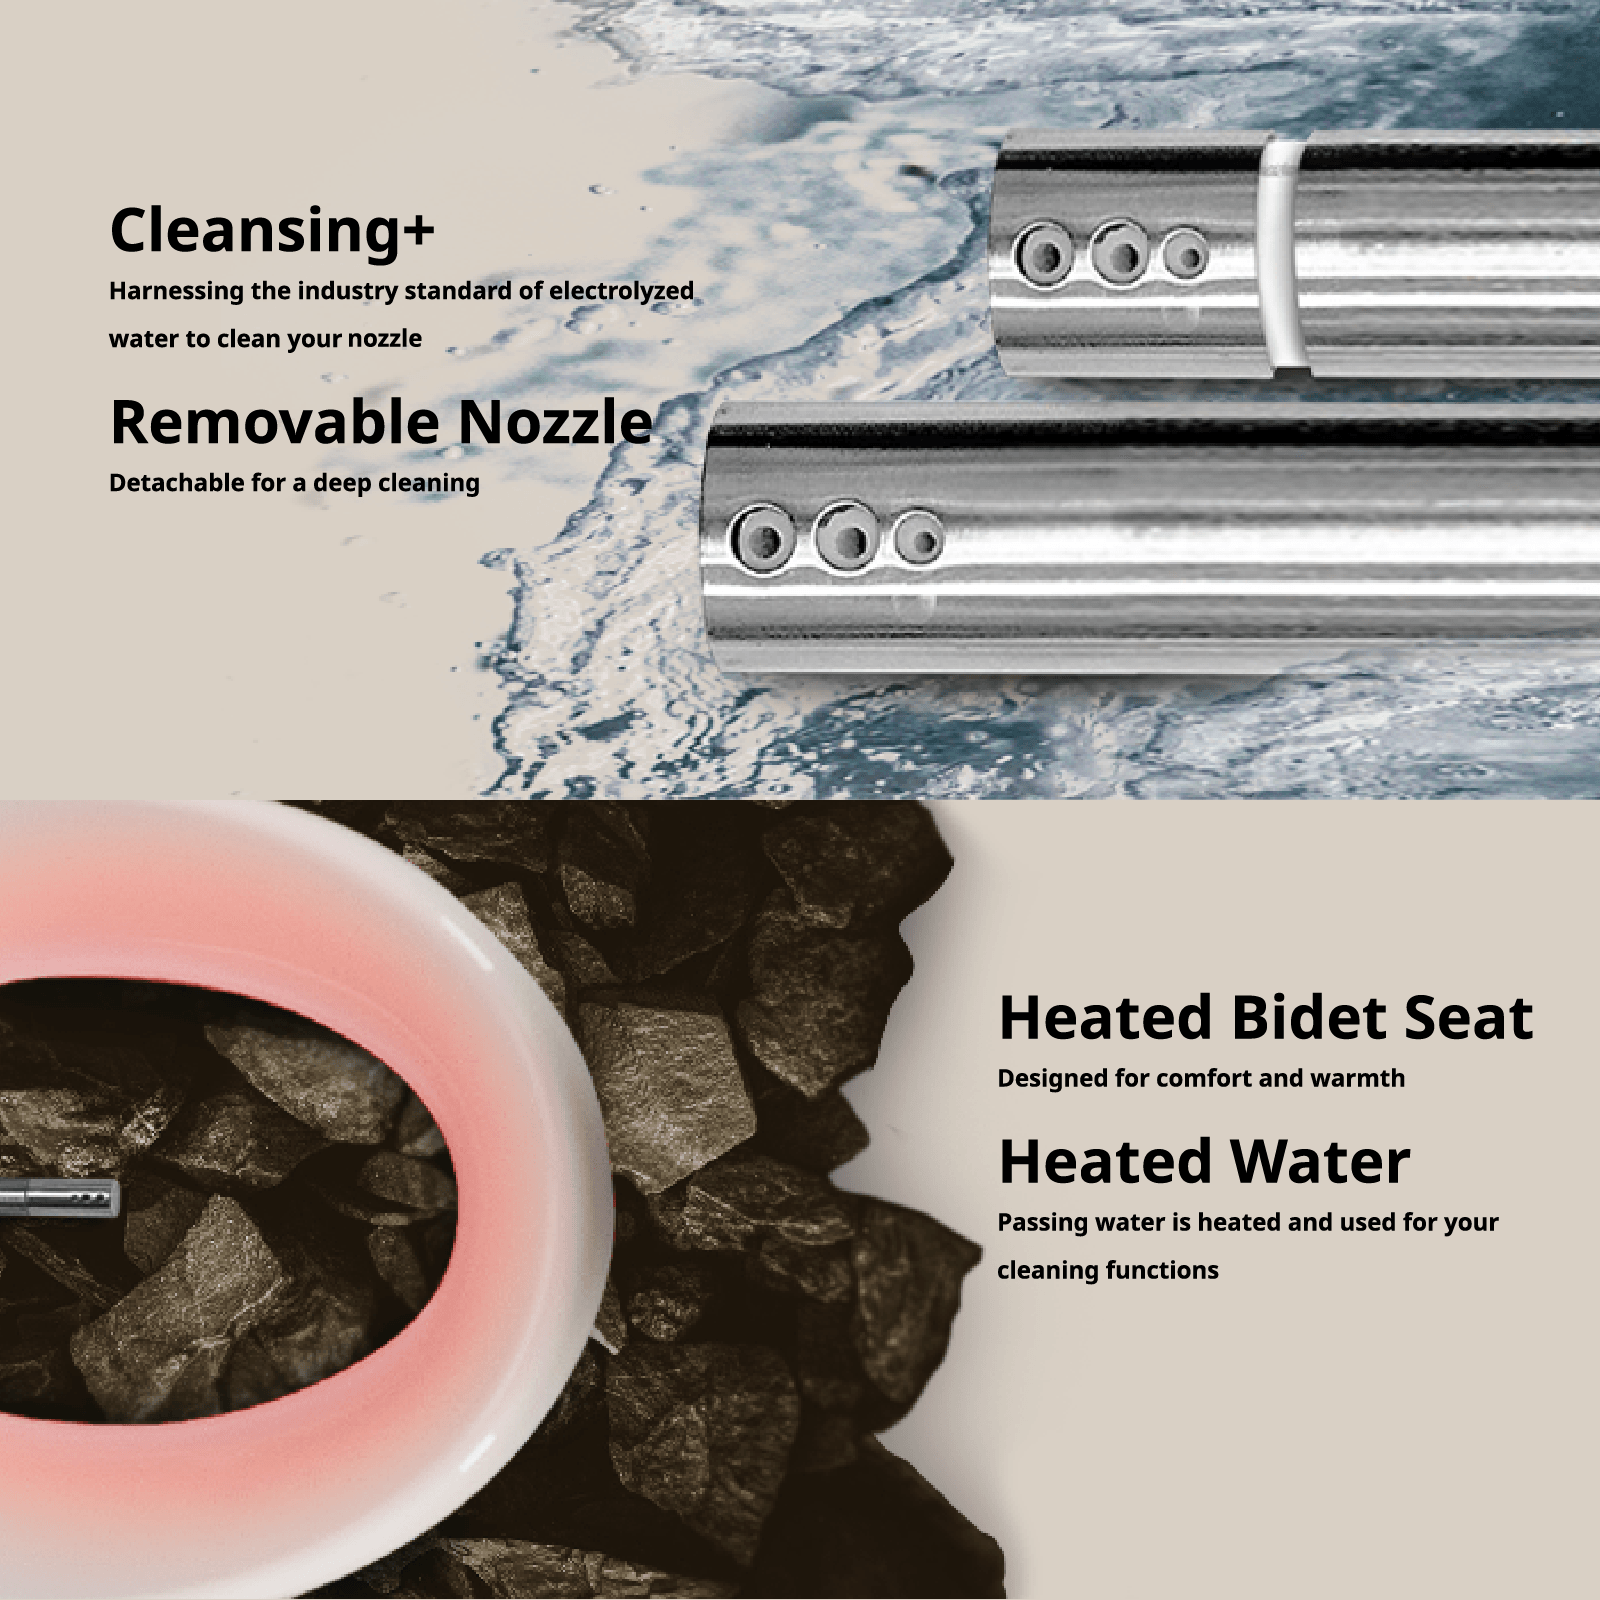 INUS R52 bidet toilet seat has a nozzle cleansing system, removable nozzle which is detachable for deep cleansing, heated bidet seat designed for comfort and warmth, and heated water. 